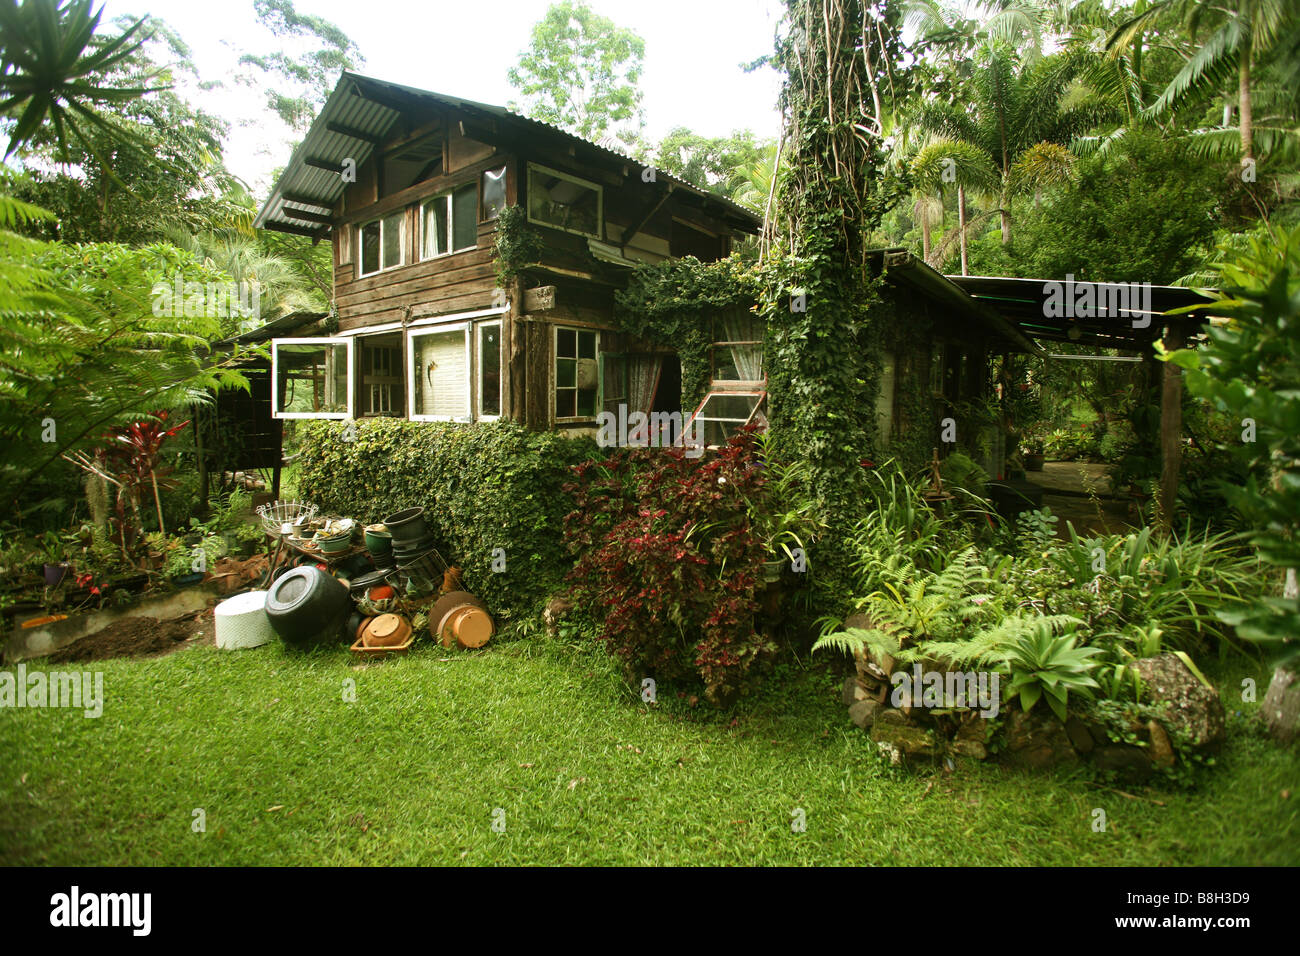 Rain-forest home Stock Photo